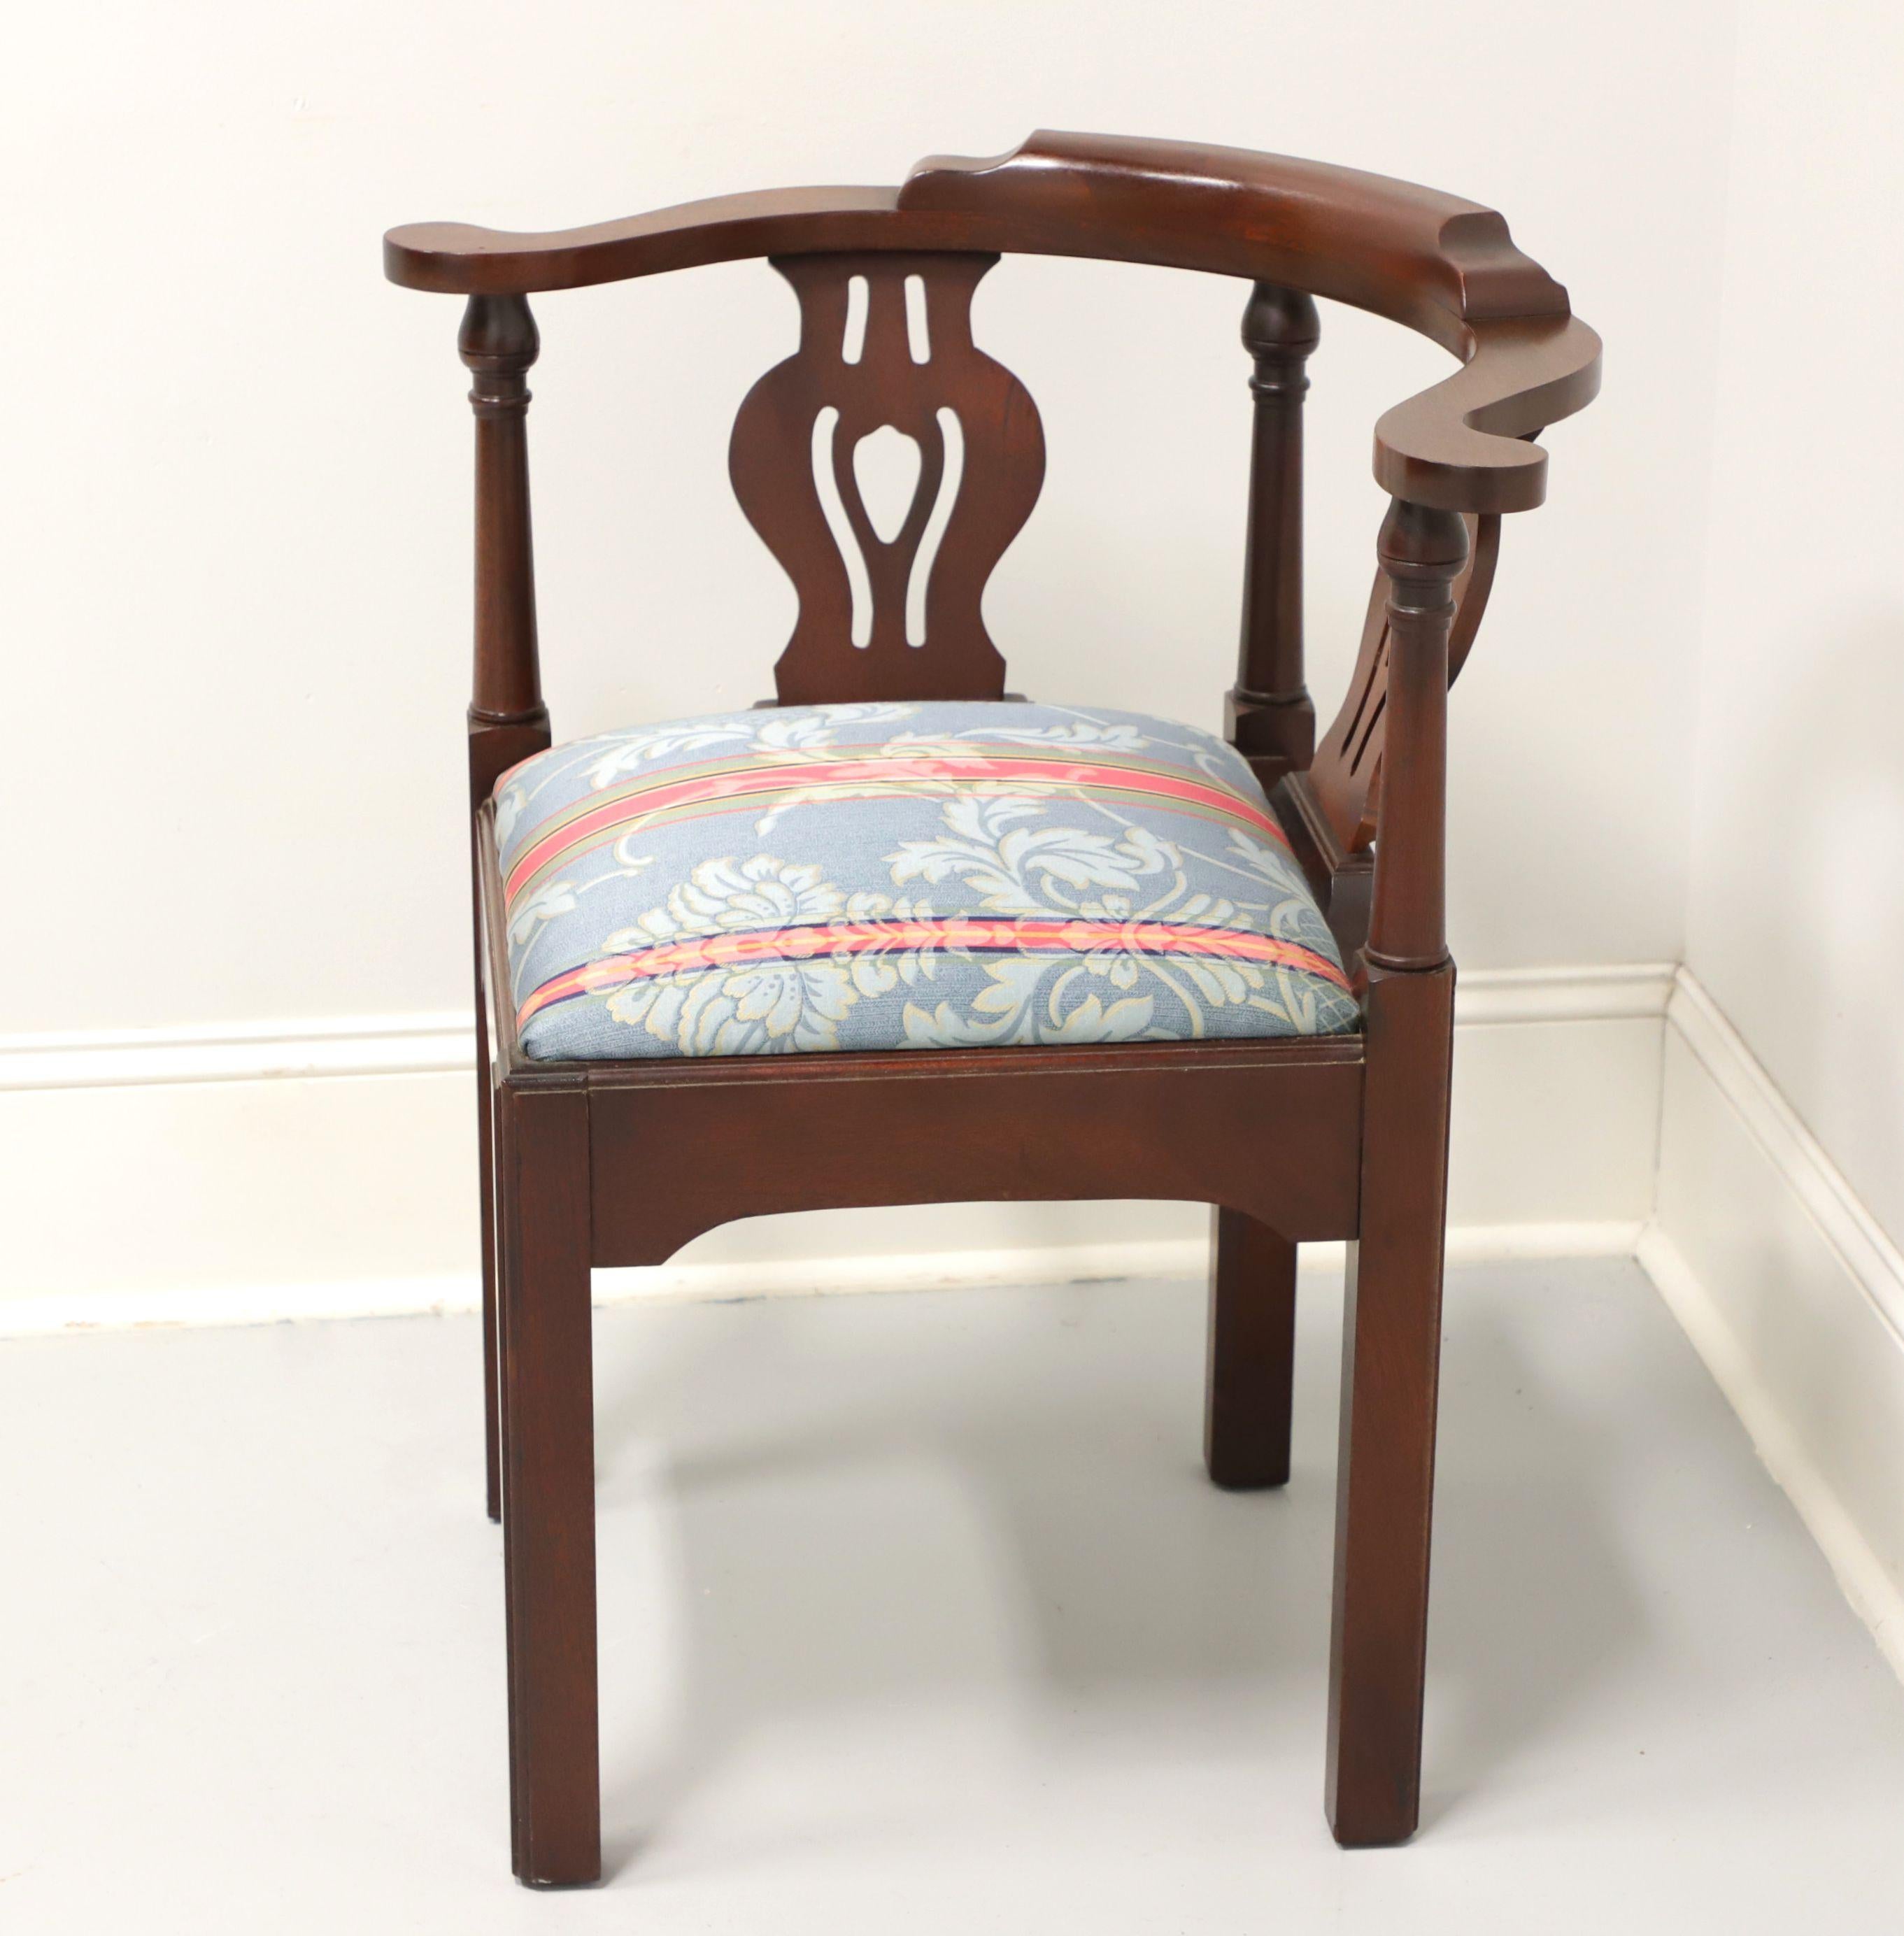 American CRAFTIQUE Mahogany Chippendale Corner Chair